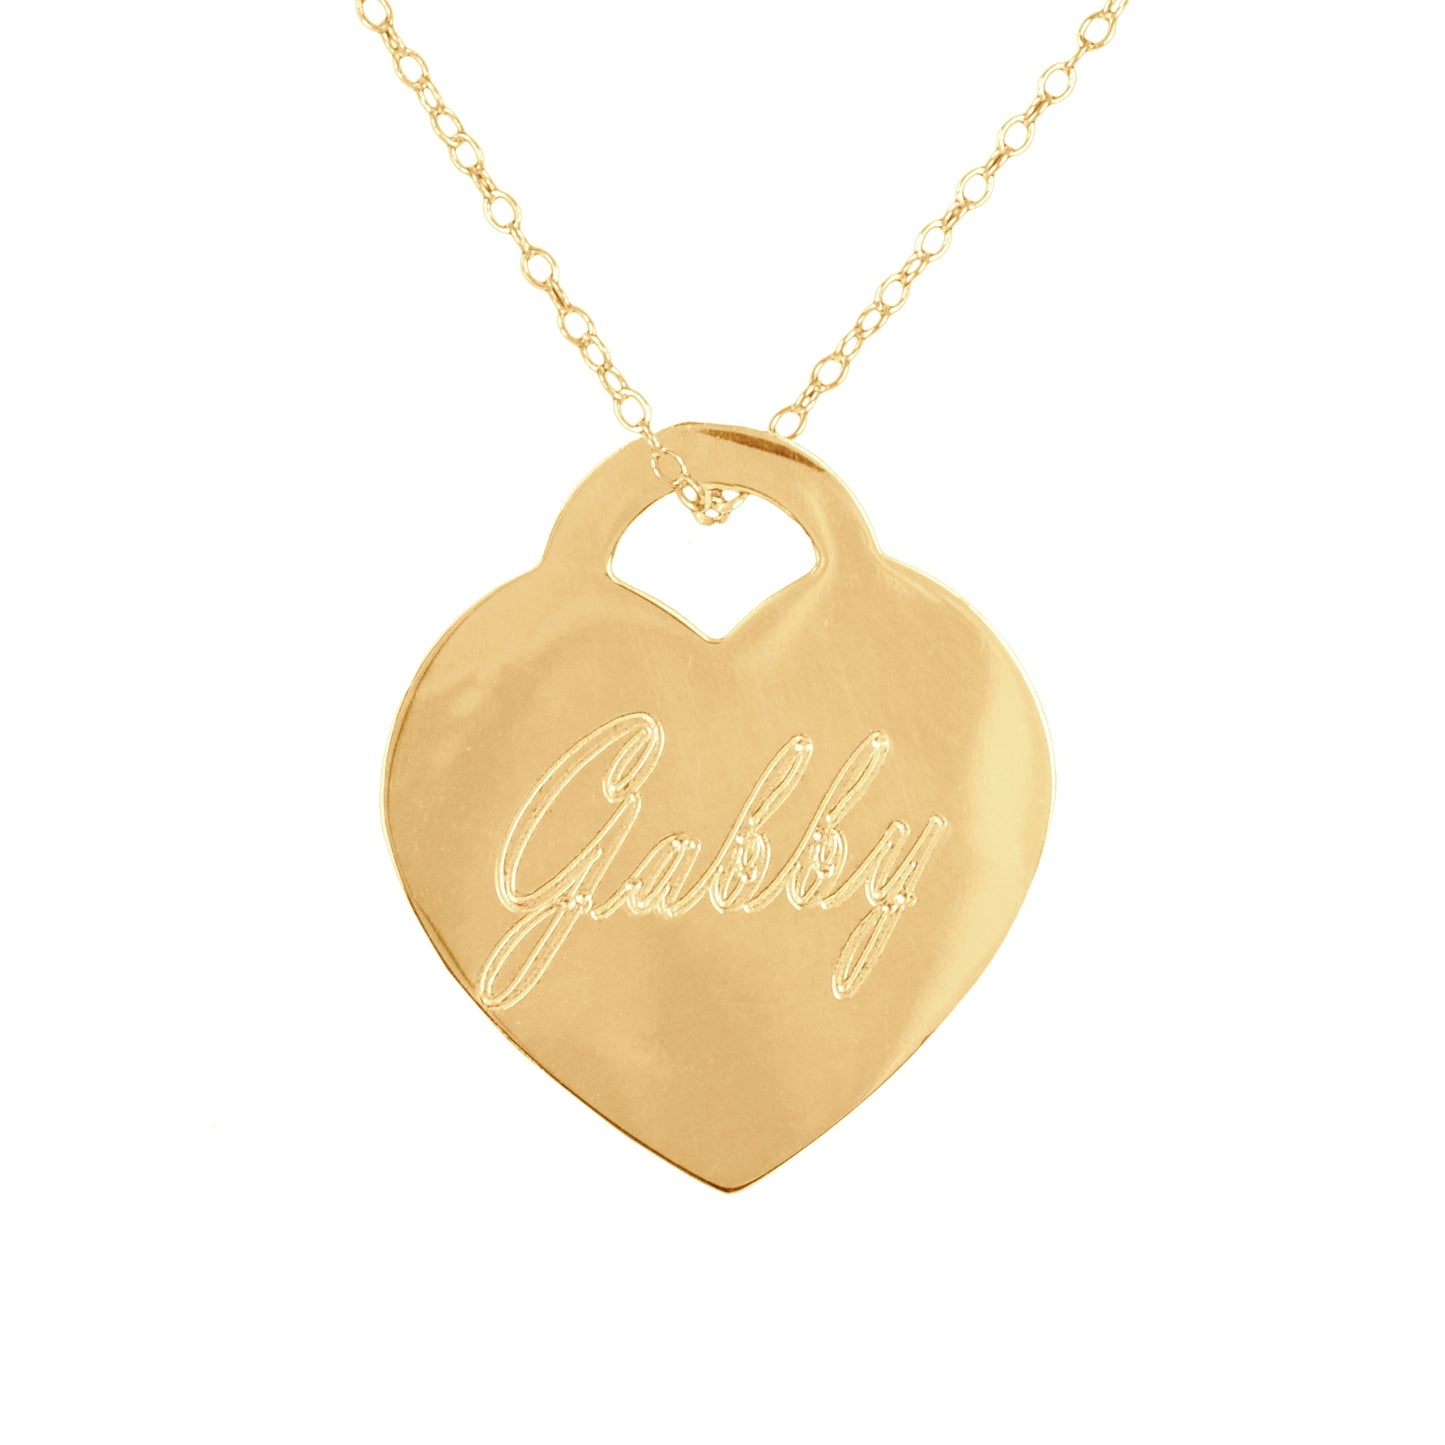 Engraved Name Heart Pendant with Chain